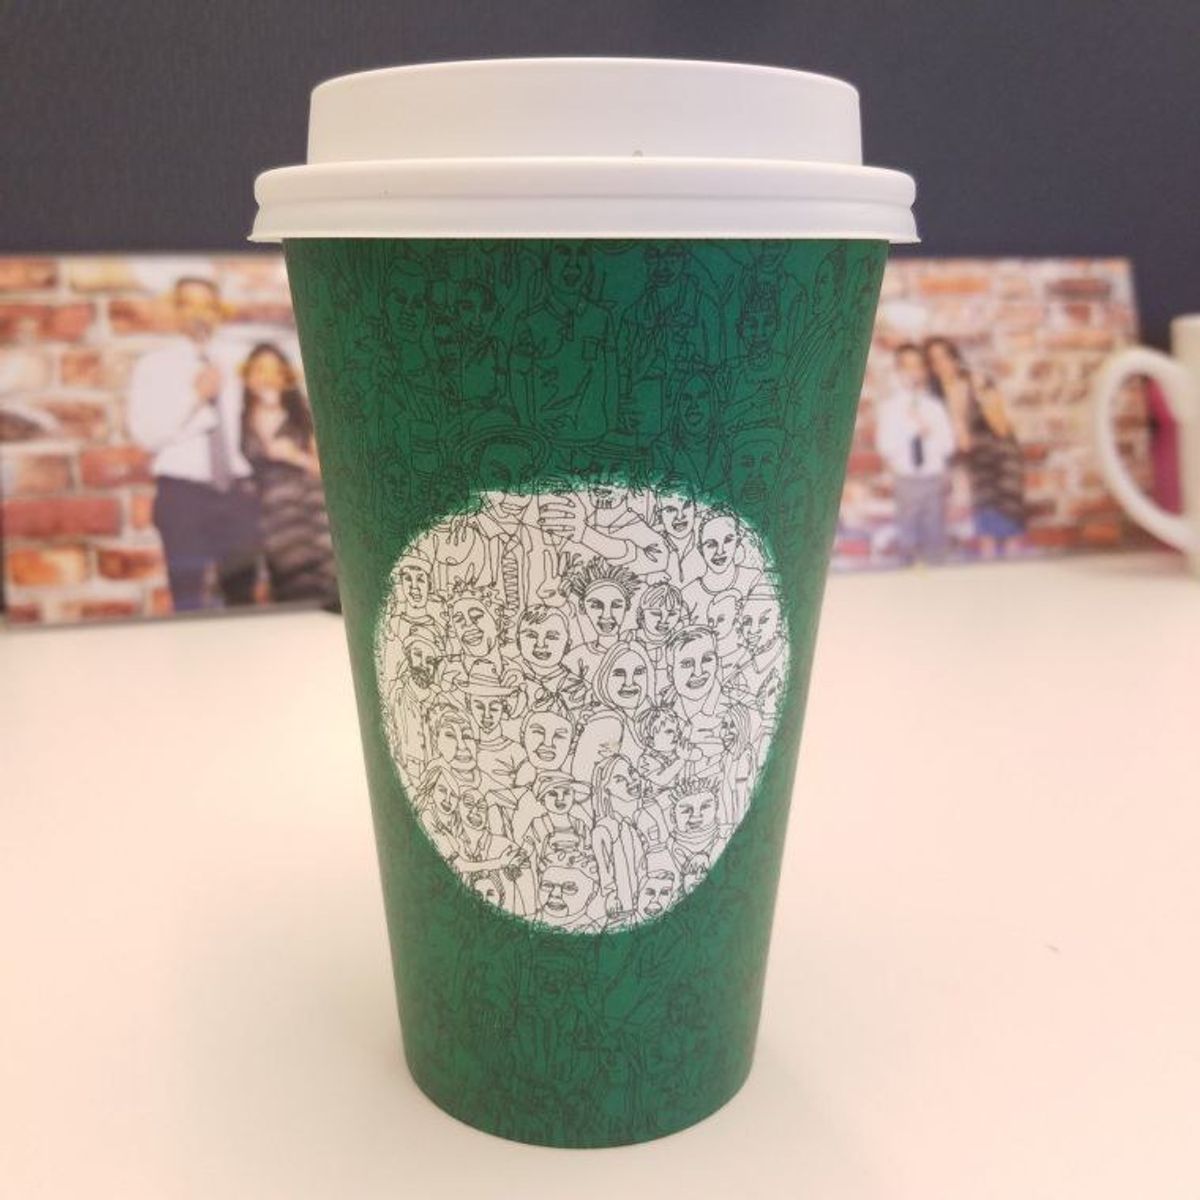 To Those Upset About The Green Starbucks Cup: Chill